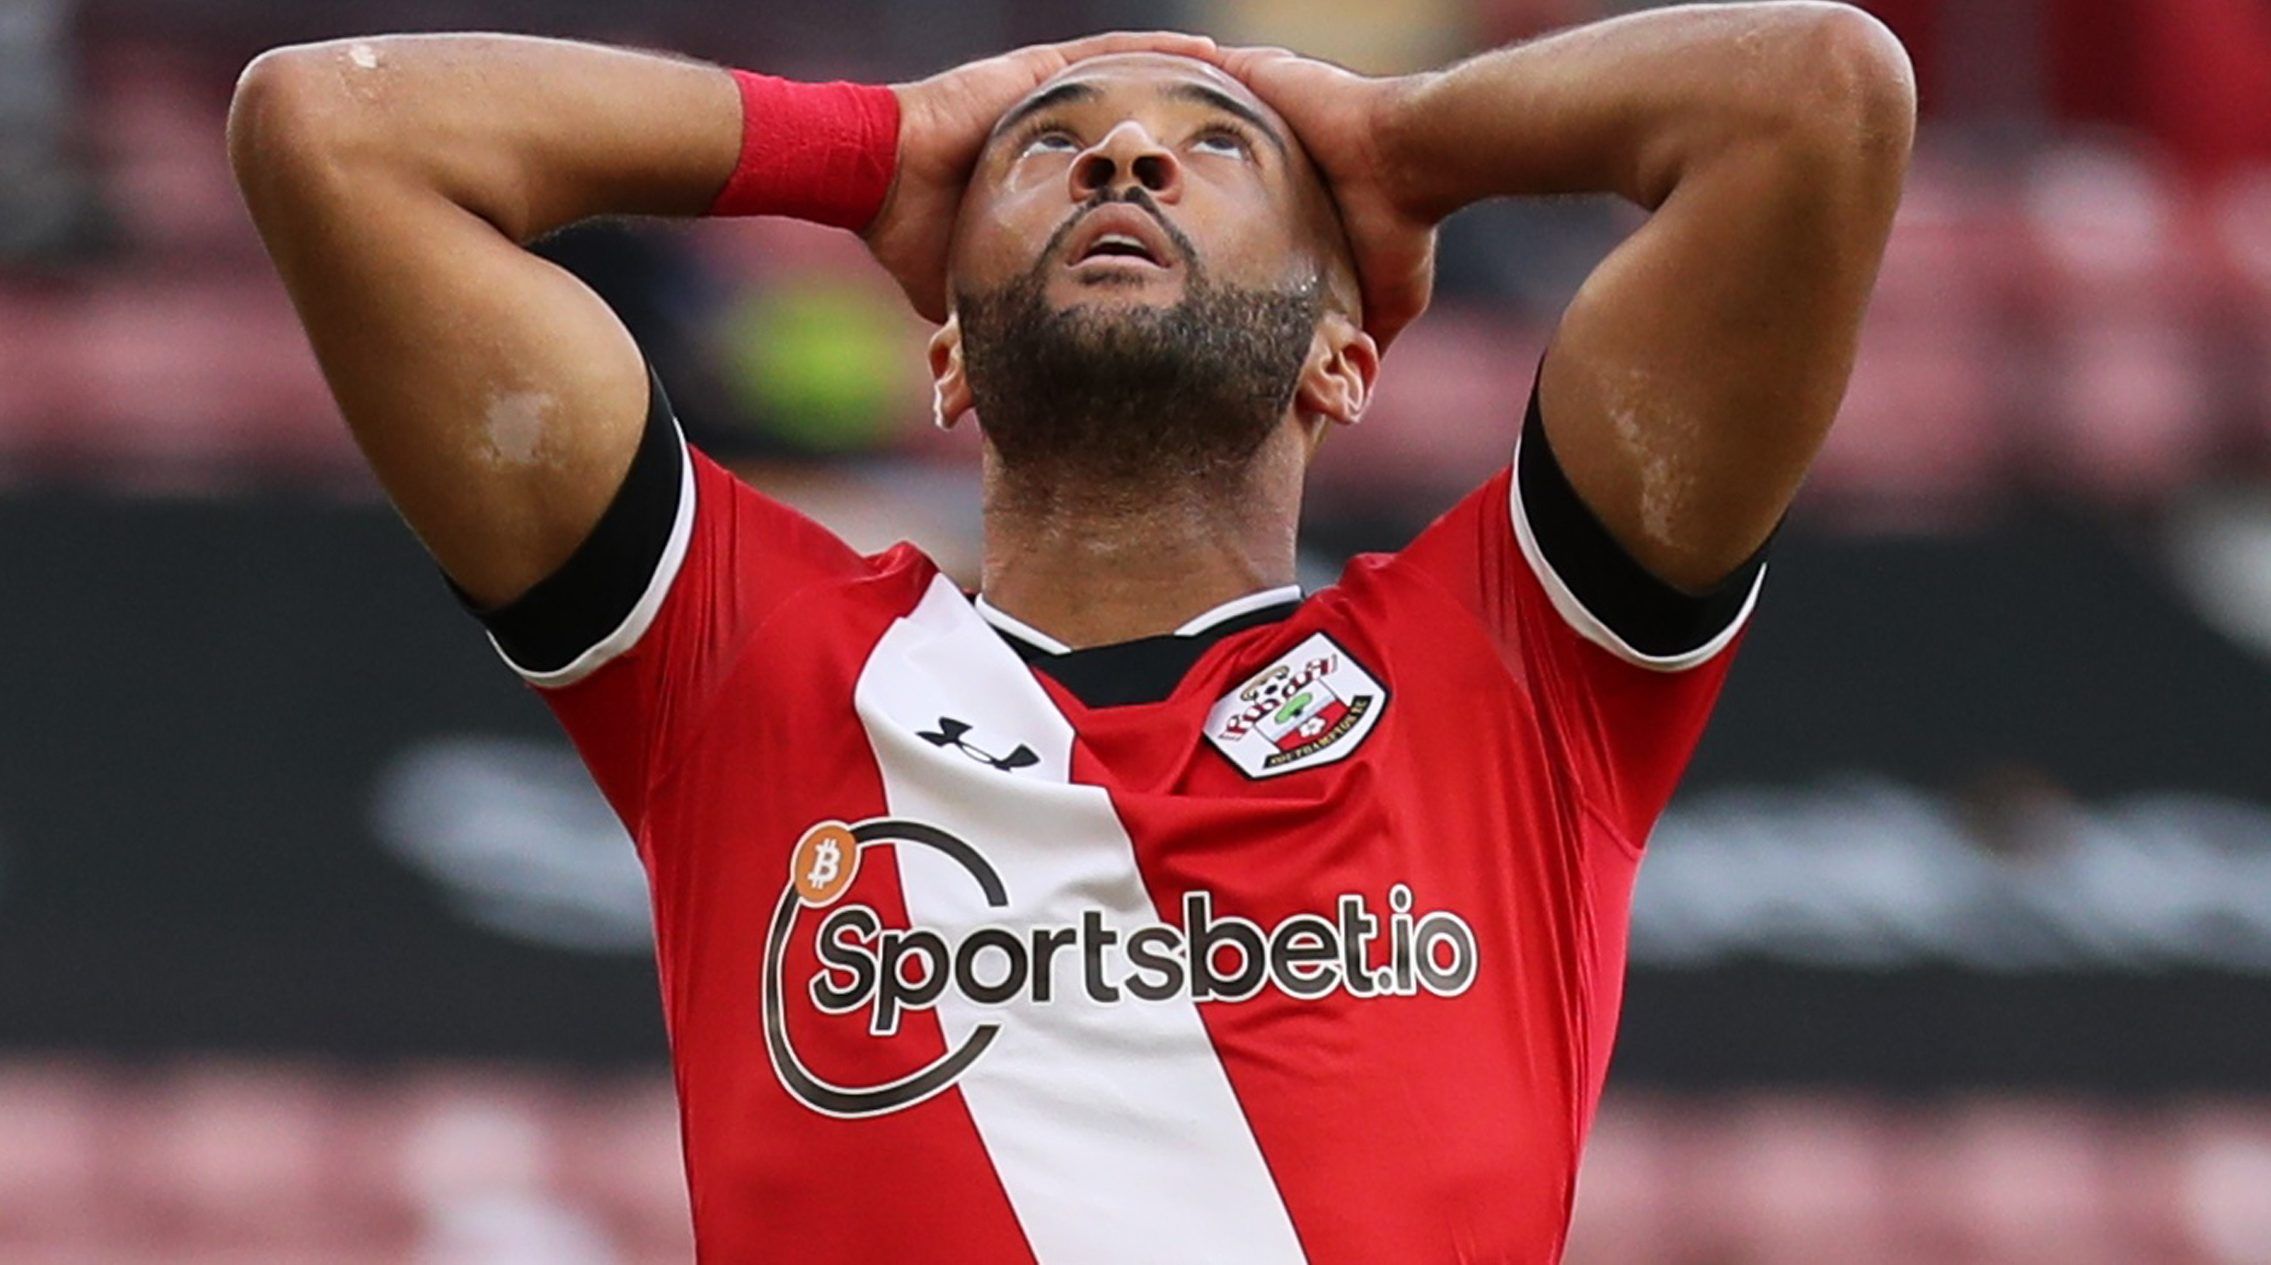 Soccer Football - Premier League - Southampton v Everton - St Mary's Stadium, Southampton, Britain - October 25, 2020 Southampton's Nathan Redmond reacts after a missed chance Pool via REUTERS/Naomi Baker EDITORIAL USE ONLY. No use with unauthorized audio, video, data, fixture lists, club/league logos or 'live' services. Online in-match use limited to 75 images, no video emulation. No use in betting, games or single club /league/player publications.  Please contact your account representative fo